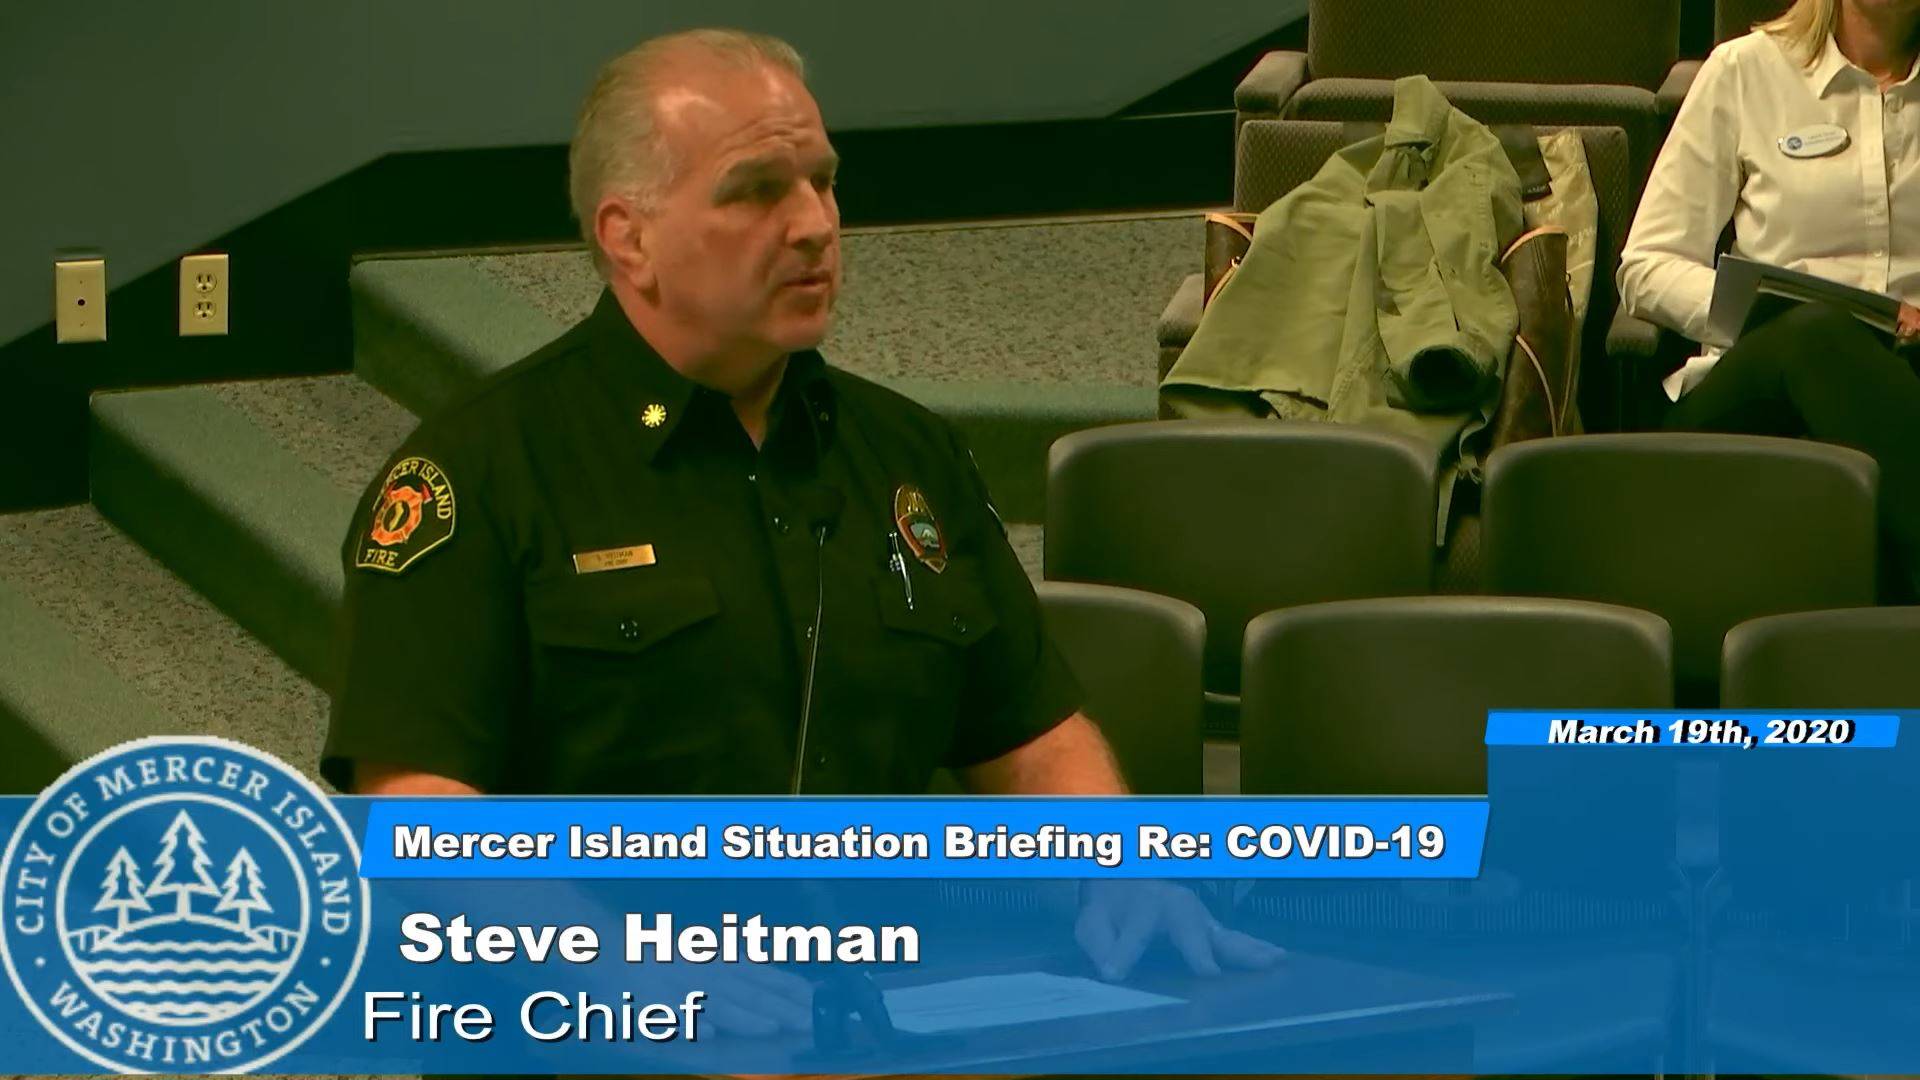 Mercer Island Fire Chief Steve Heitman speaks at the city’s second situation briefing on COVID-19. These briefings will occur weekly at 3 p.m. on Thursday, streamed live. Video screenshot.